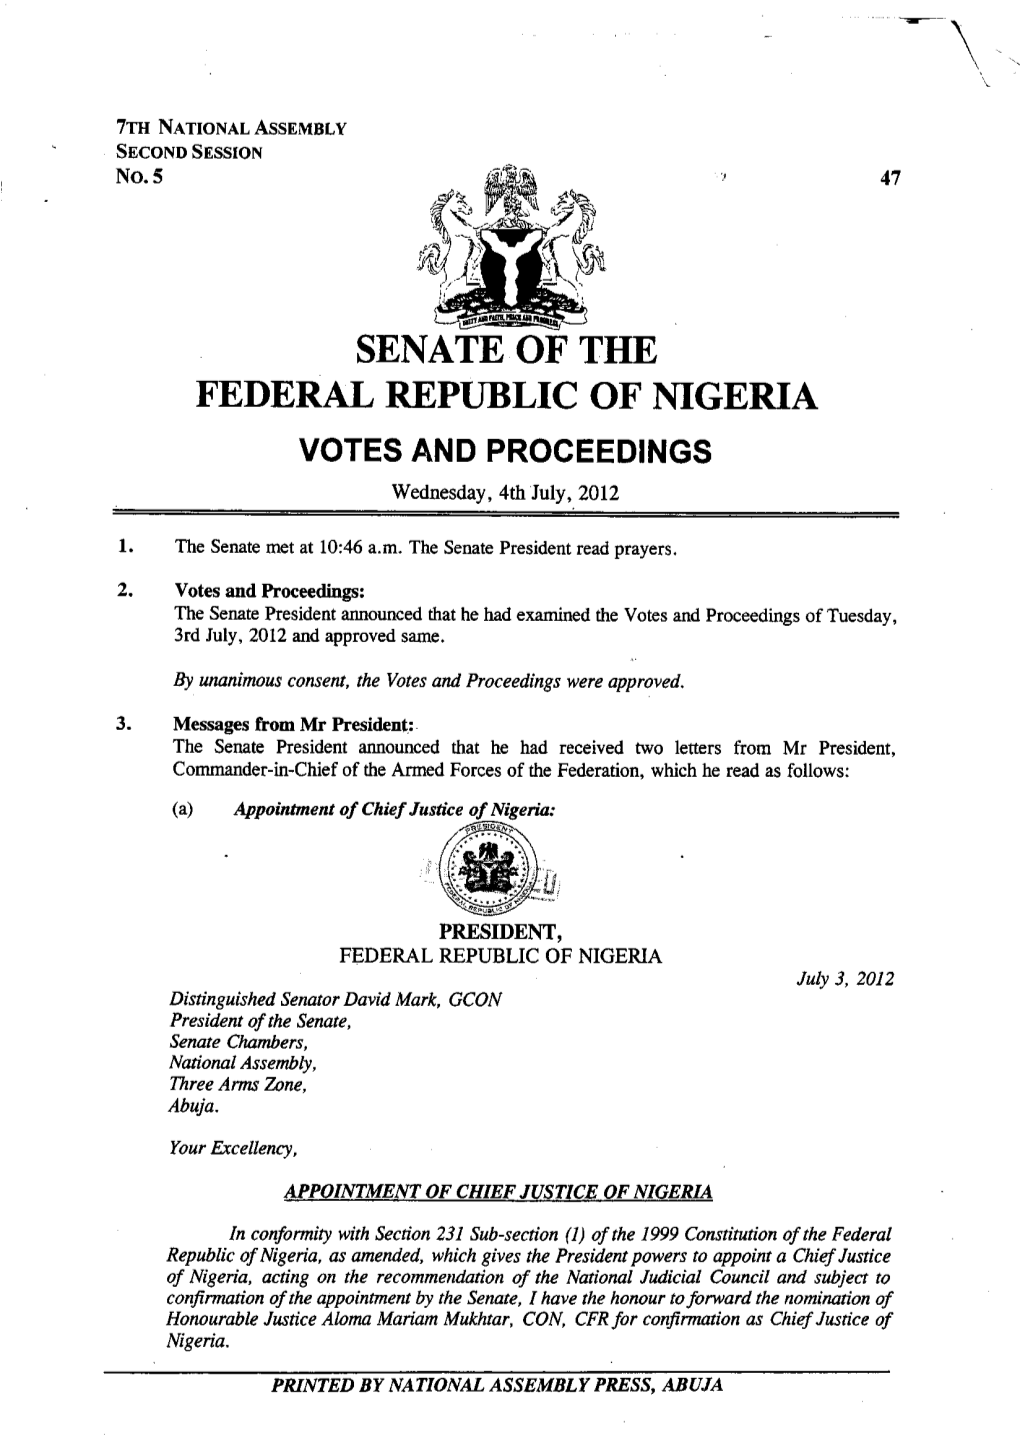 SENATE of the FEDERAL REPUBLIC of NIGERIA VOTES and PROCEEDINGS Wednesday, 4Th July, 2012